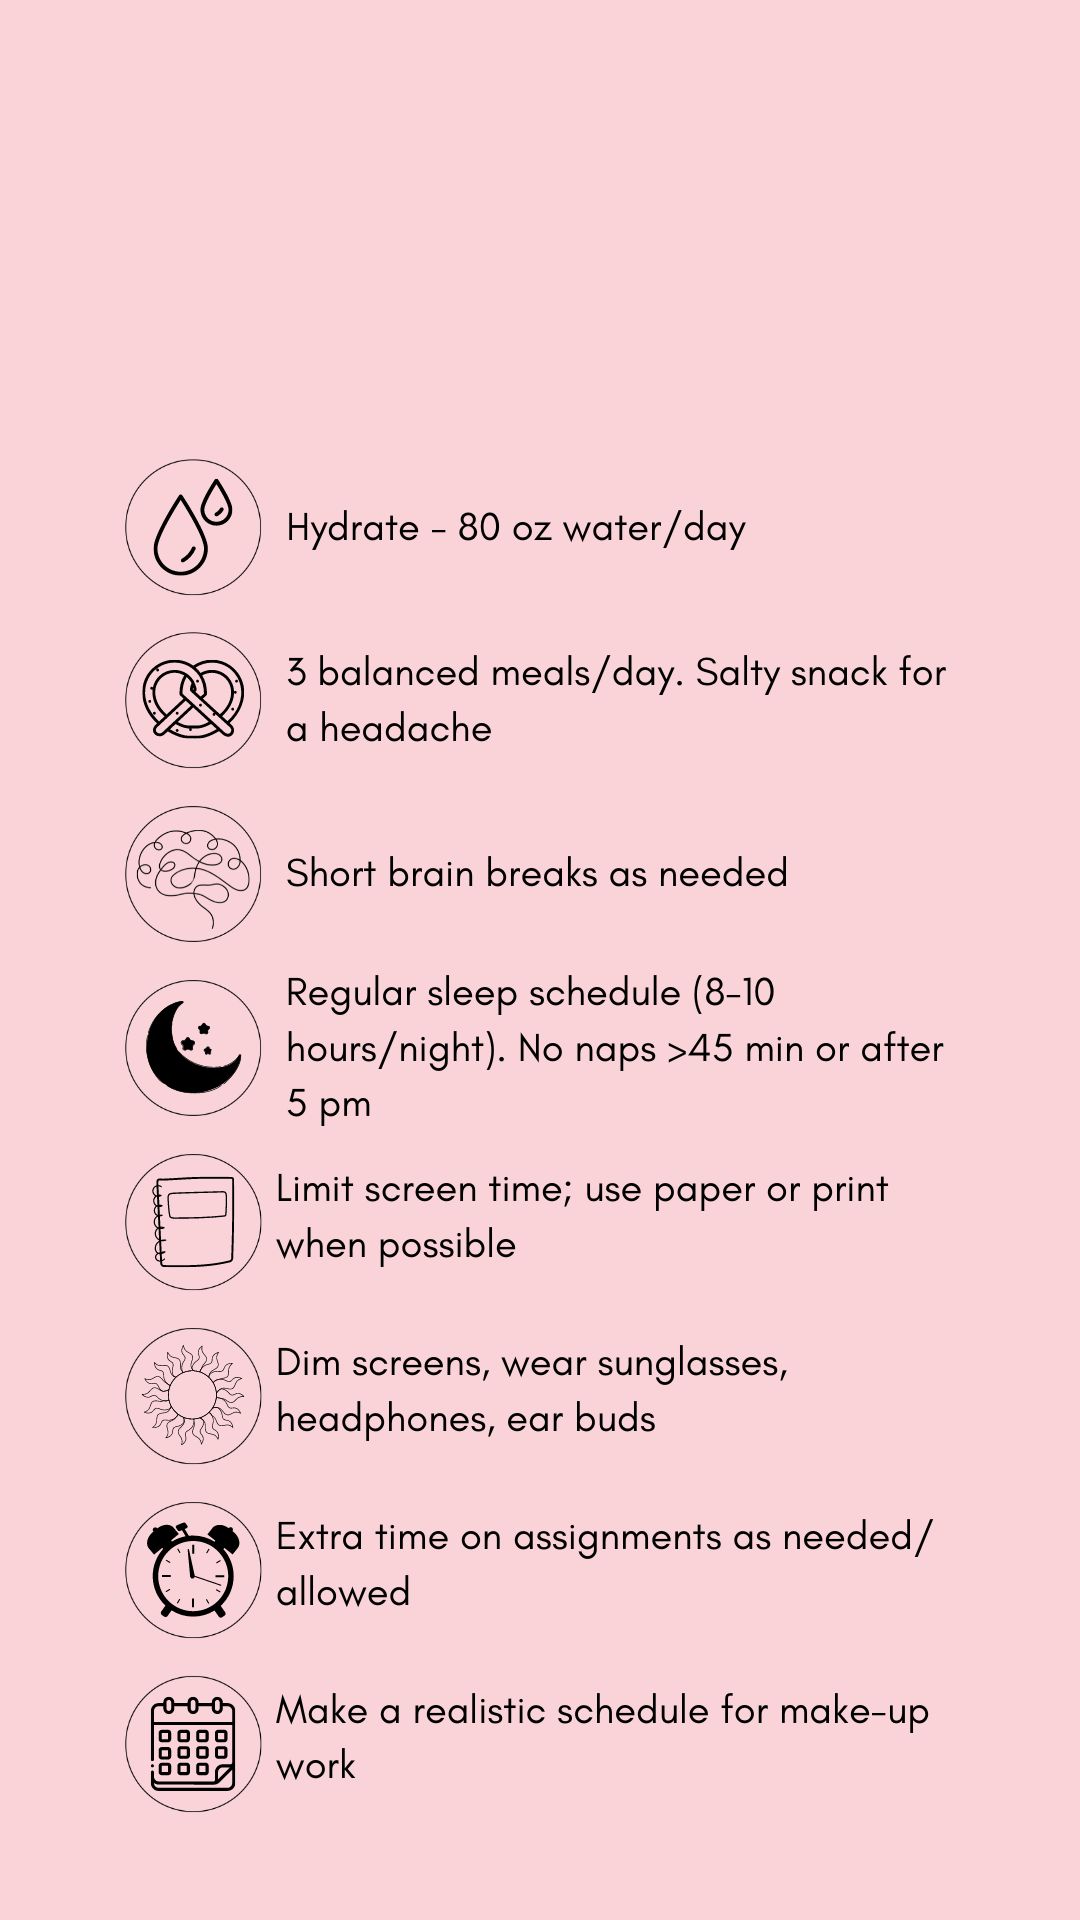 Concussion treatment tips in black text and graphics against a pink backdrop. The tips read, hydrate (80 oz. water/day). Eat 3 balanced meals/day, salt snack for headache. Short brain breaks as needed, Sleep time (8-10 hrs/night), no naps > 45 mins. or after 5 pm. Limit screens, use paper/print. when possible .Dim screens. wear sunglasses, headphones, earbuds. Allow extra time on assignments as allowed. Pace yourself. Make a realistic schedule for make-up work.